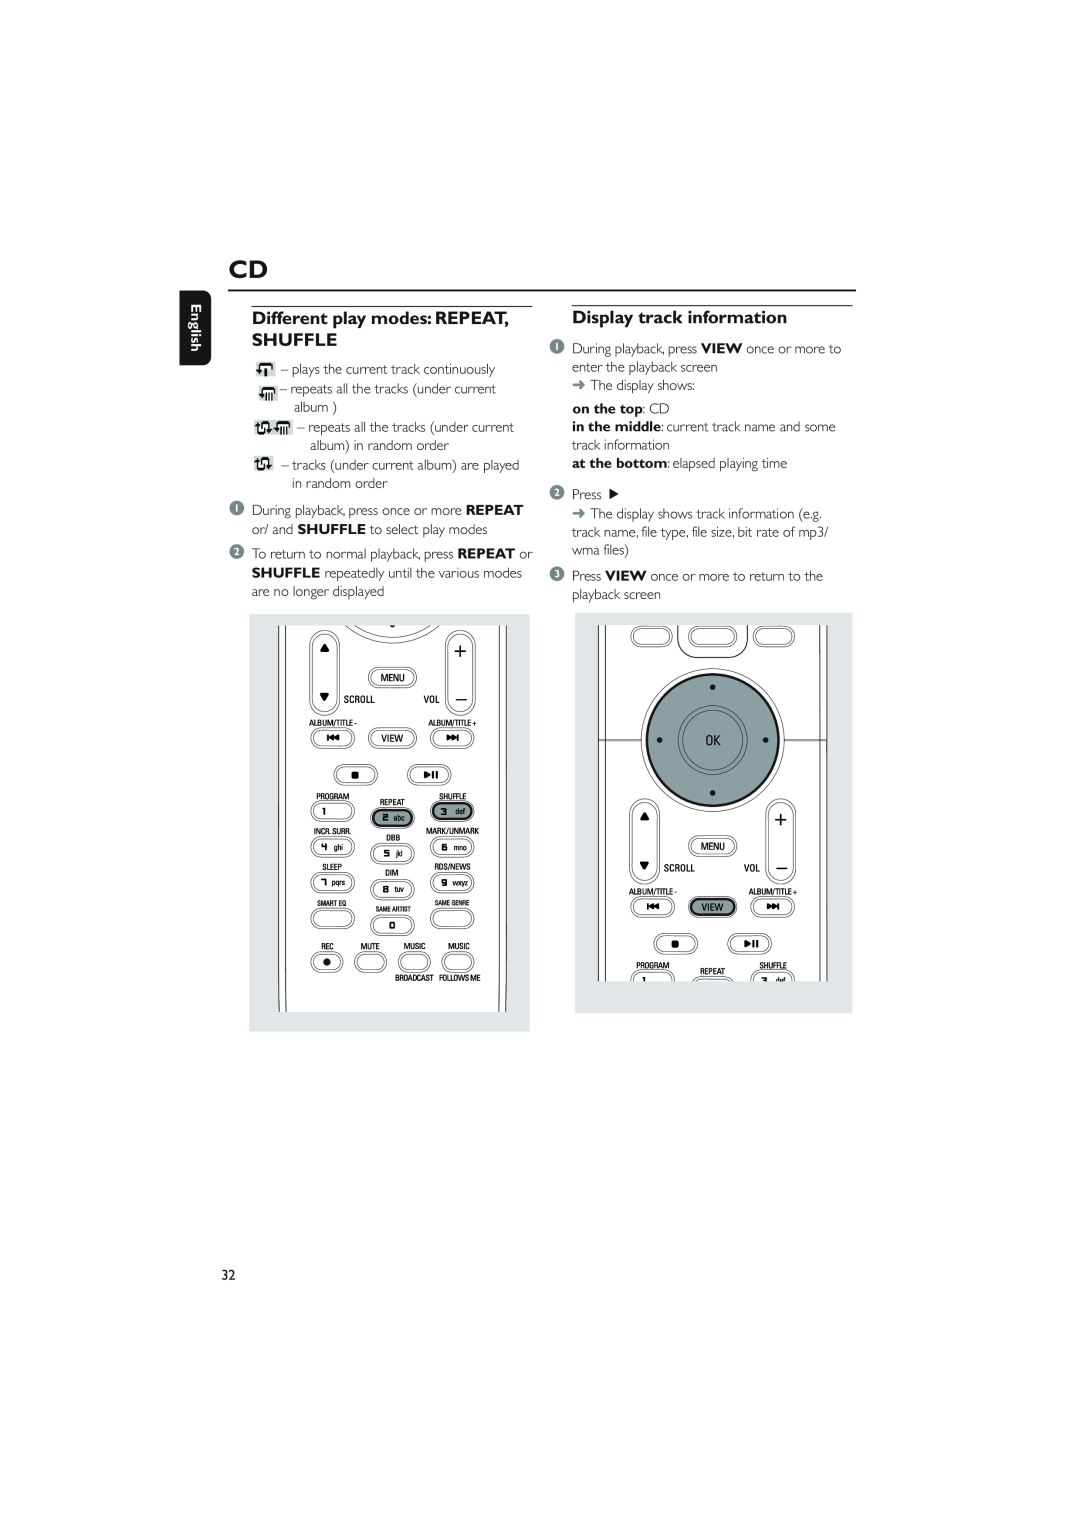 Philips WAC5 user manual Different play modes REPEAT, SHUFFLE, Display track information, English, on the top CD 